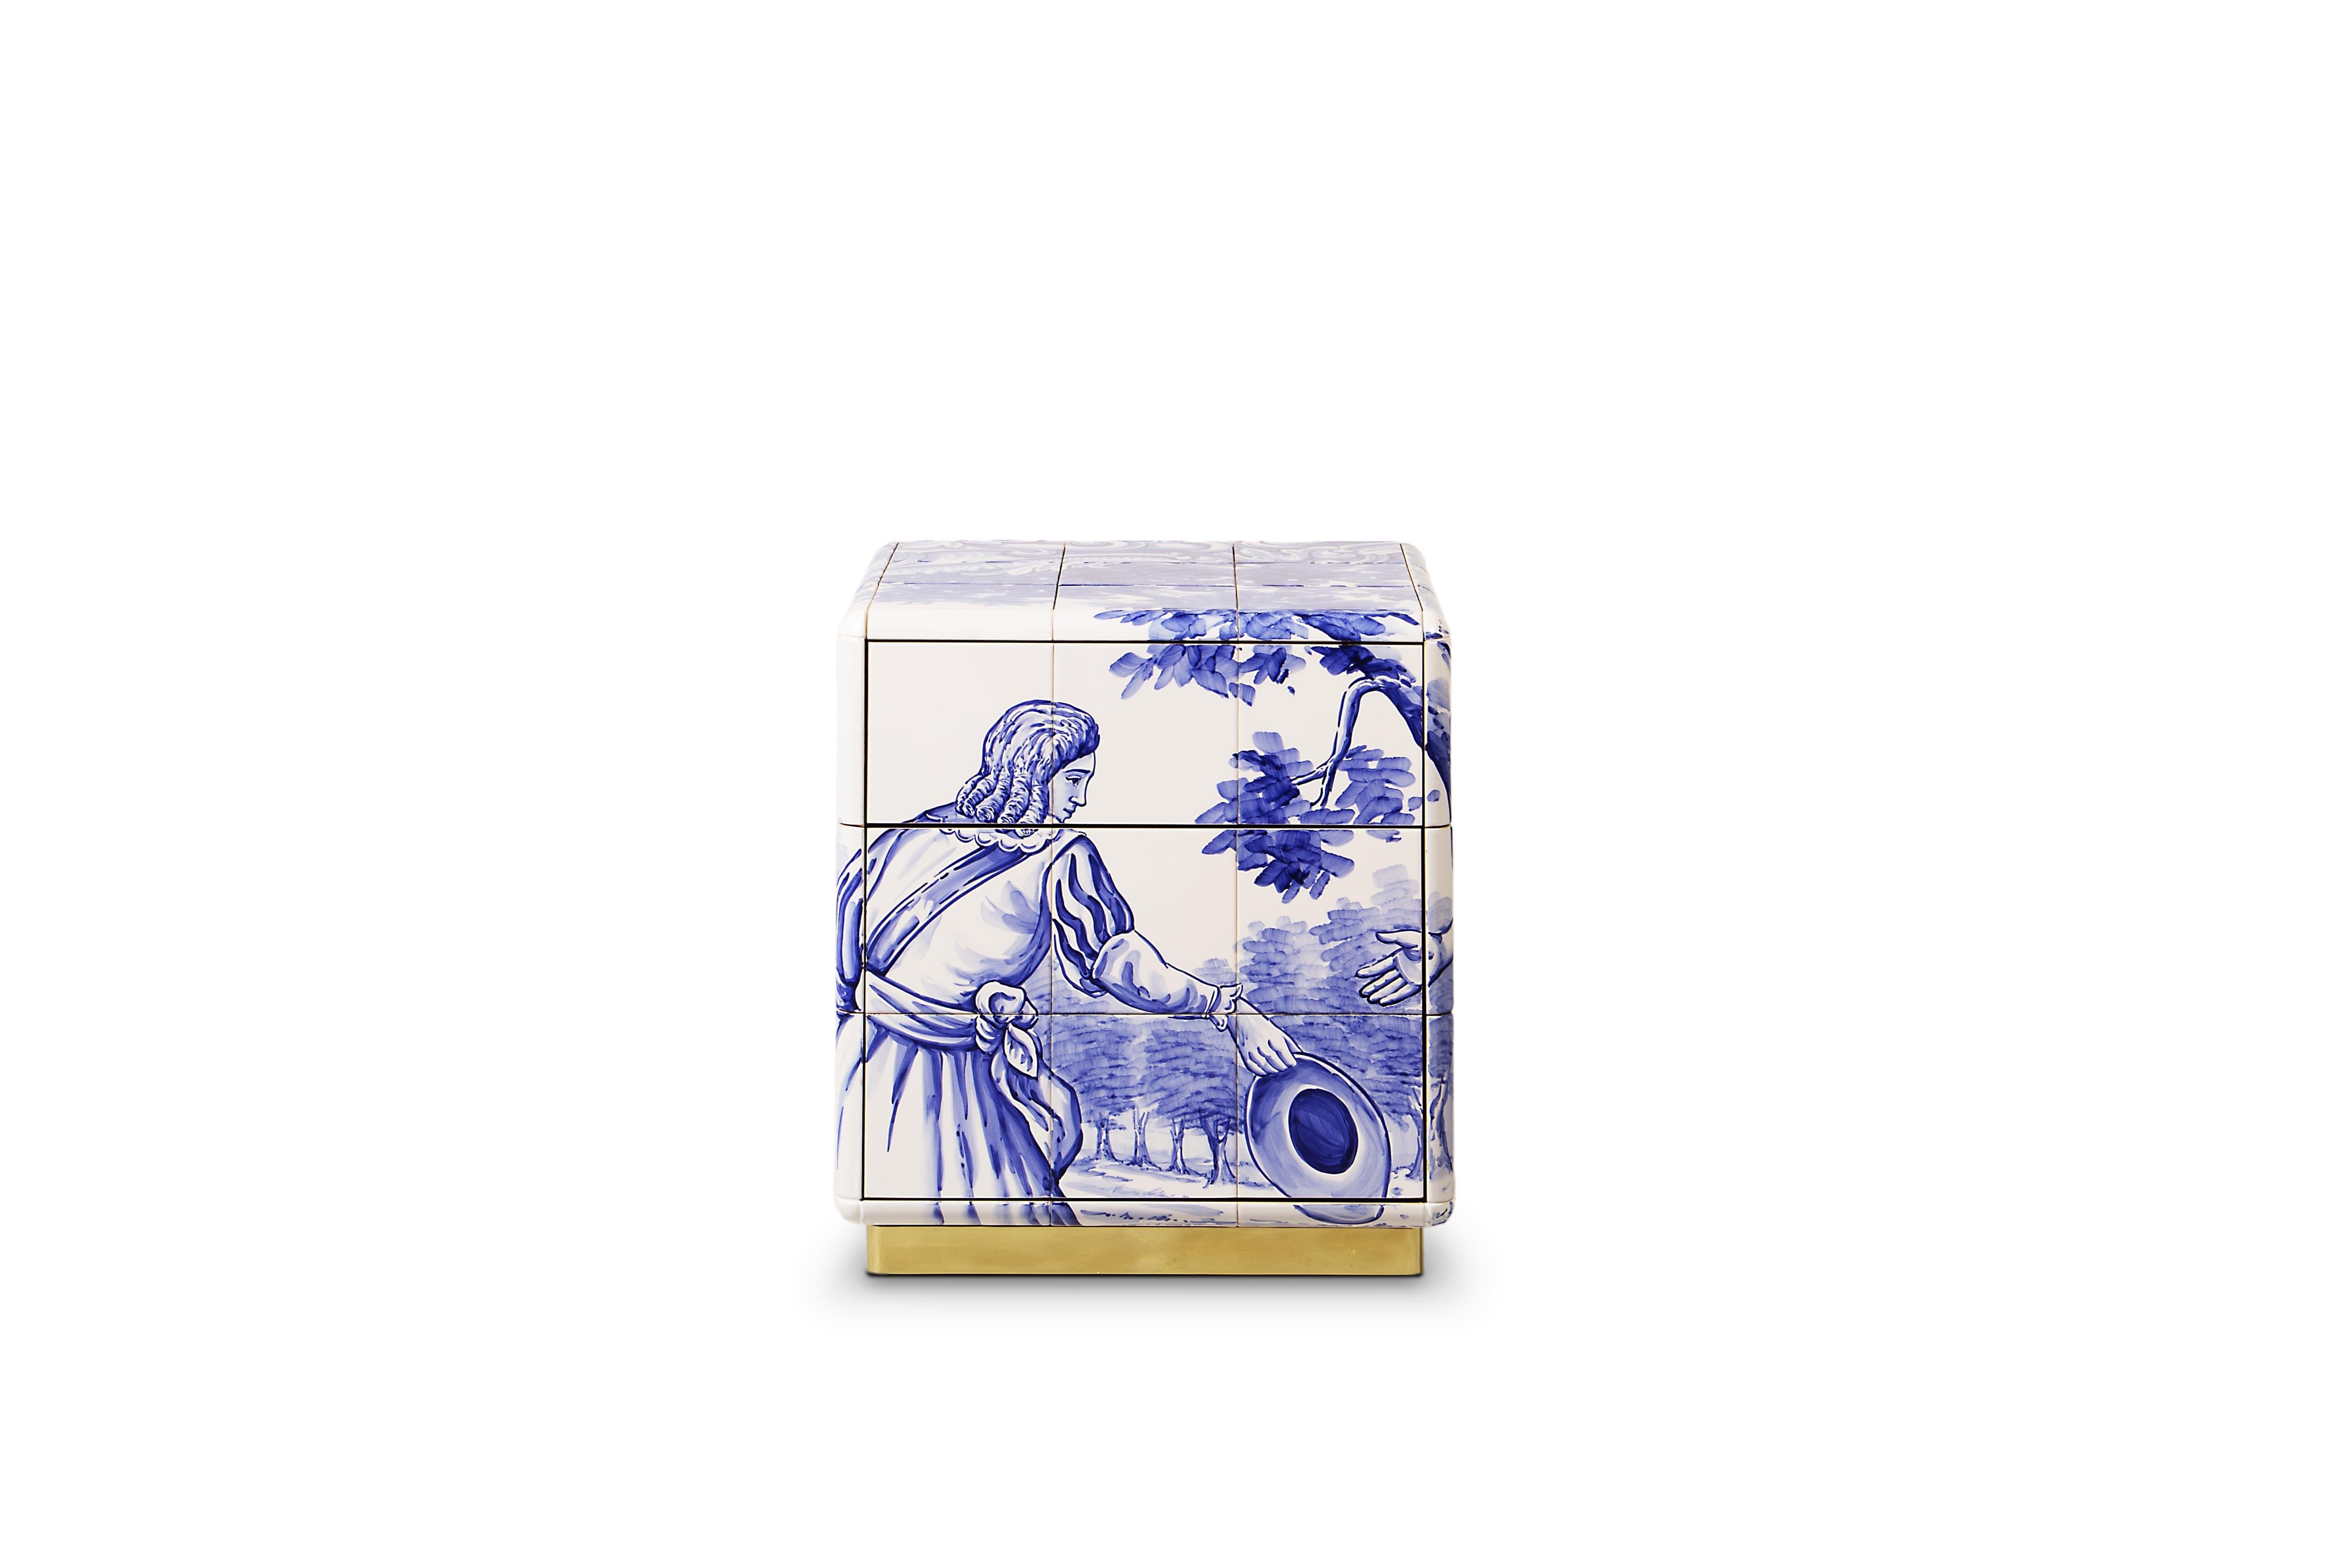 The heritage nightstand is influenced by the Azulejo, a landmark in Portuguese culture. Originating from the Arabic word zellige, this traditional hand-painted tile that can be found all-over the country, from churches to houses and gardens and was